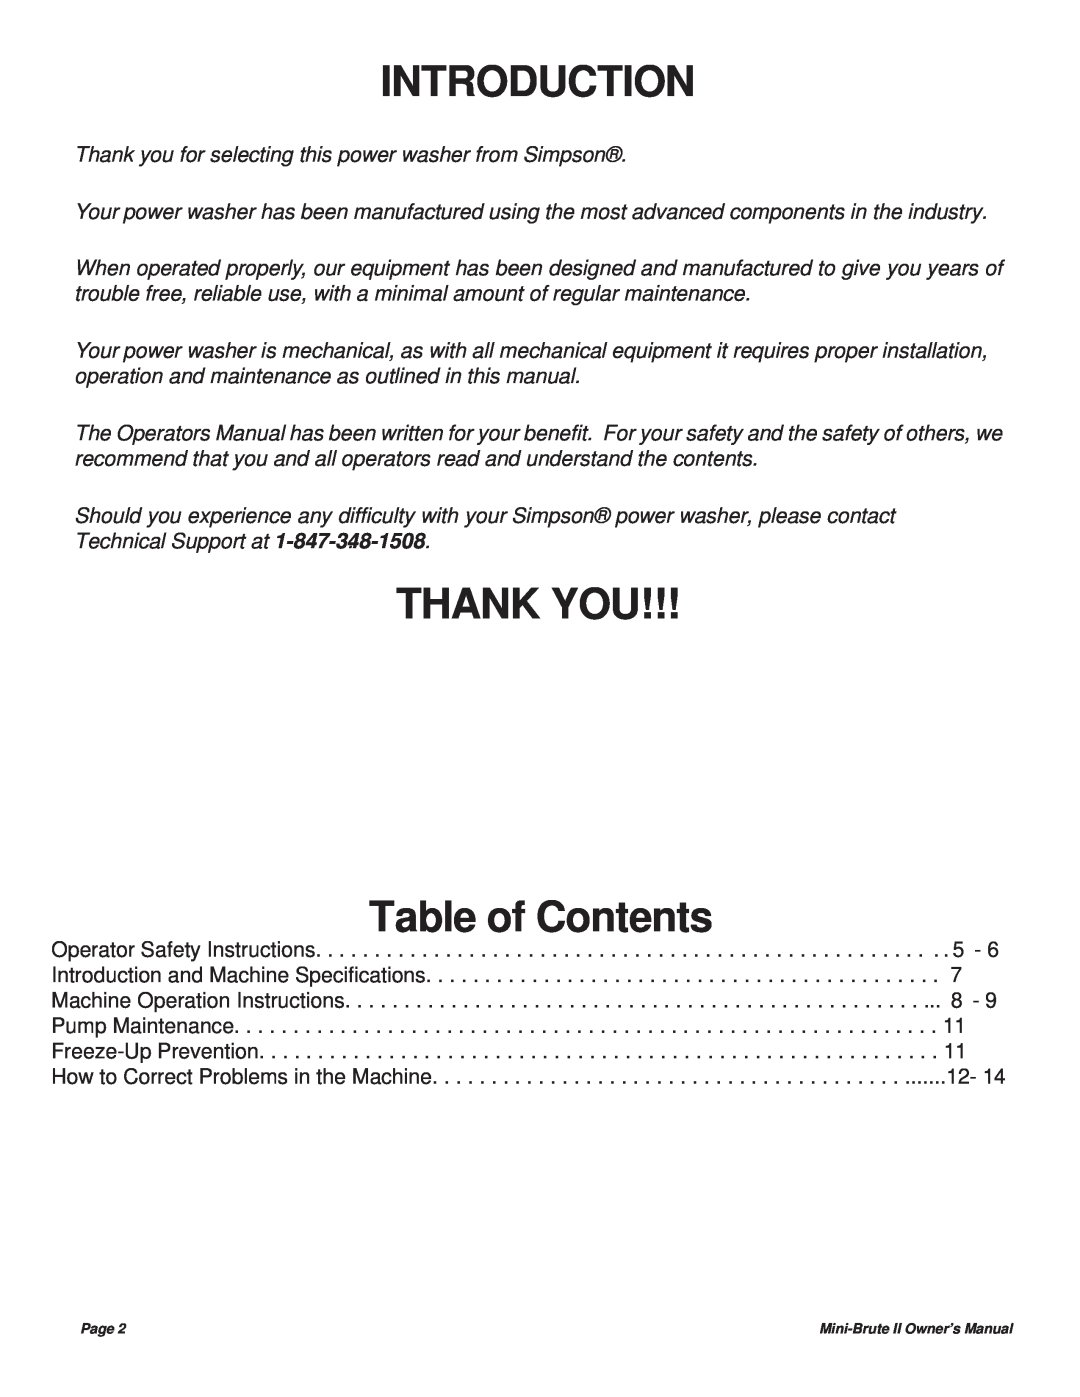 Simpson MBII manual Introduction, THANK YOU Table of Contents, Operator Safety Instructions, Machine Operation Instructions 